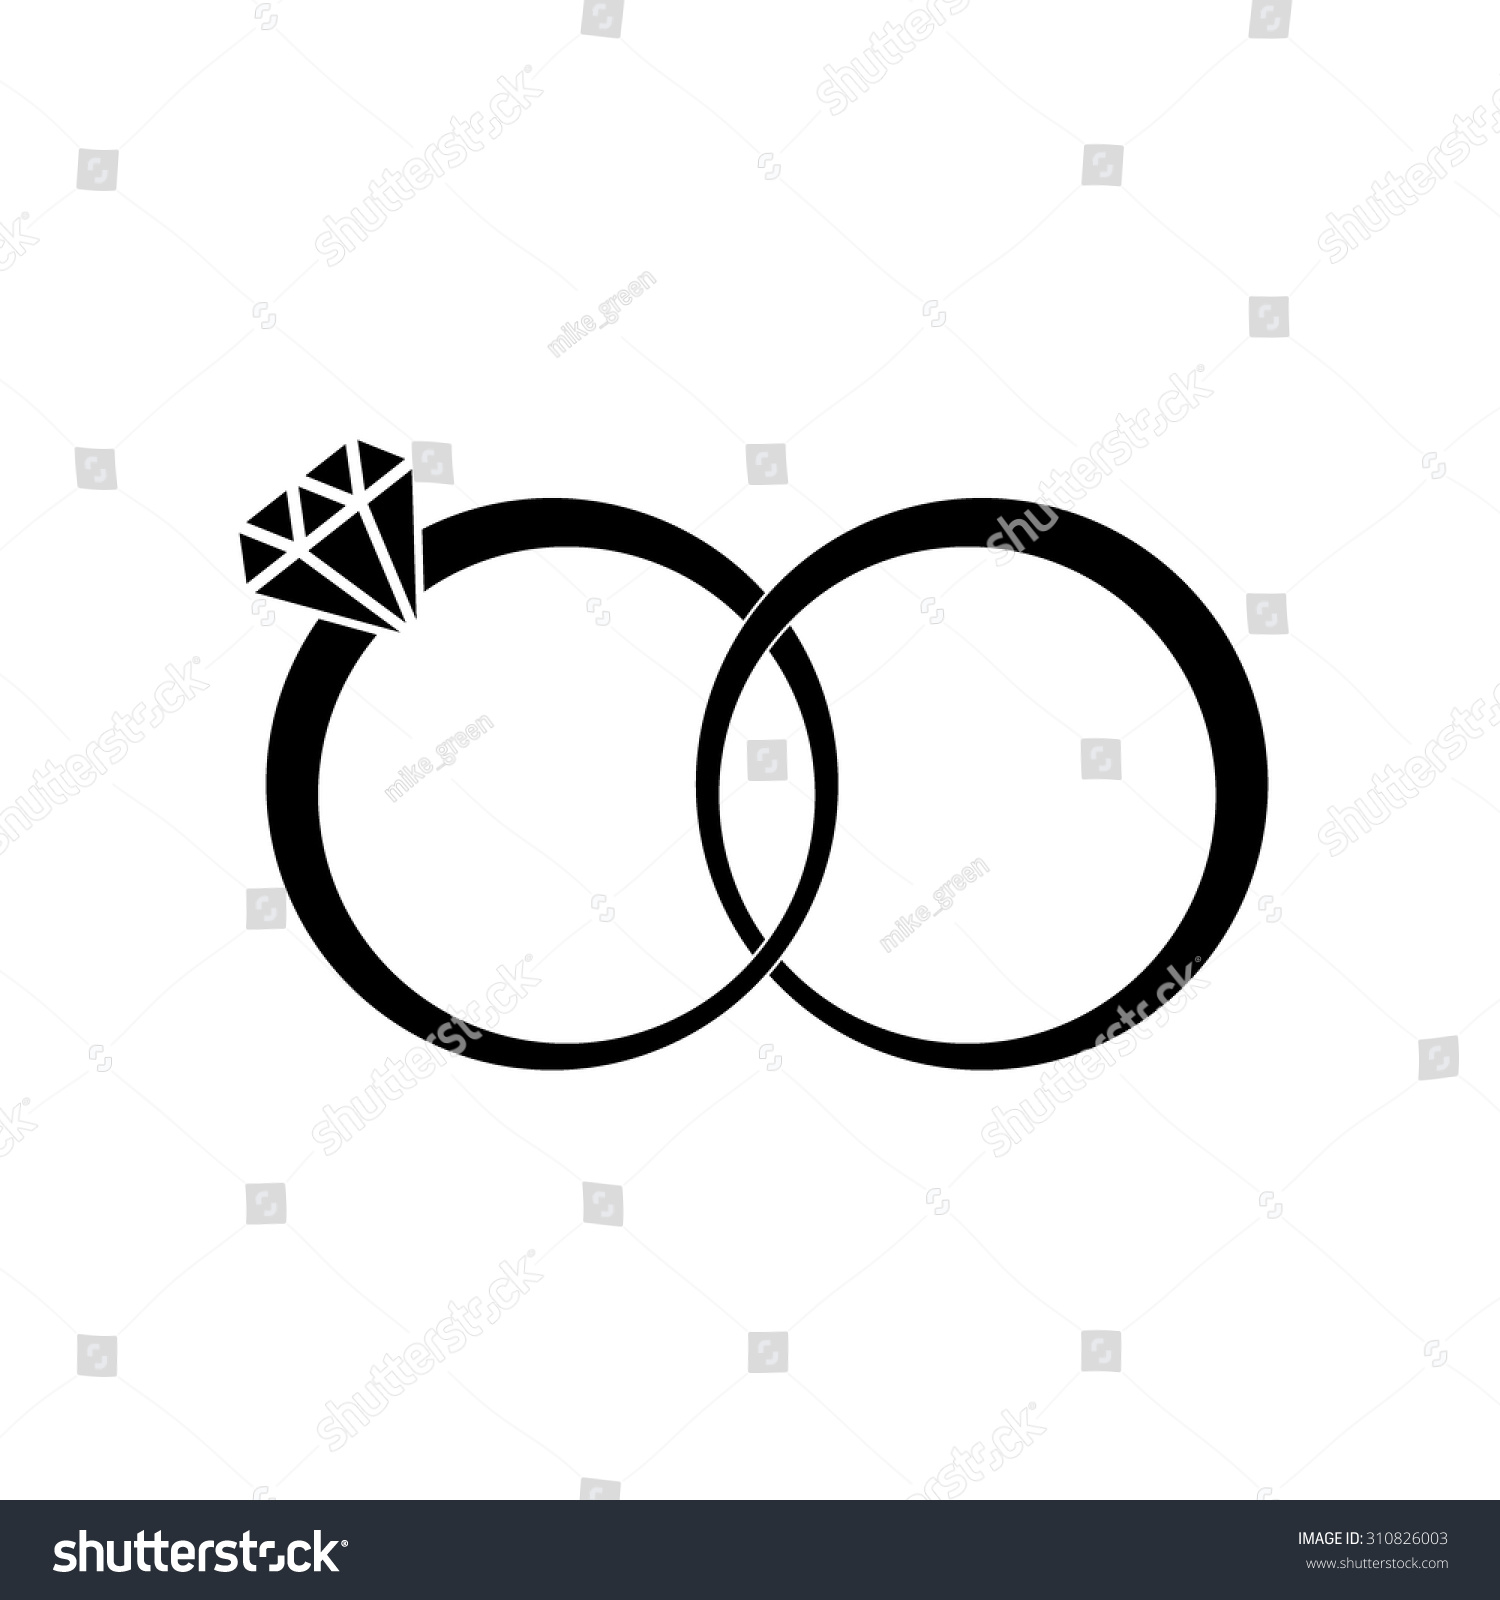 Wedding Rings Brilliant Sign Icon Engagement Stock Vector 310826003 ...